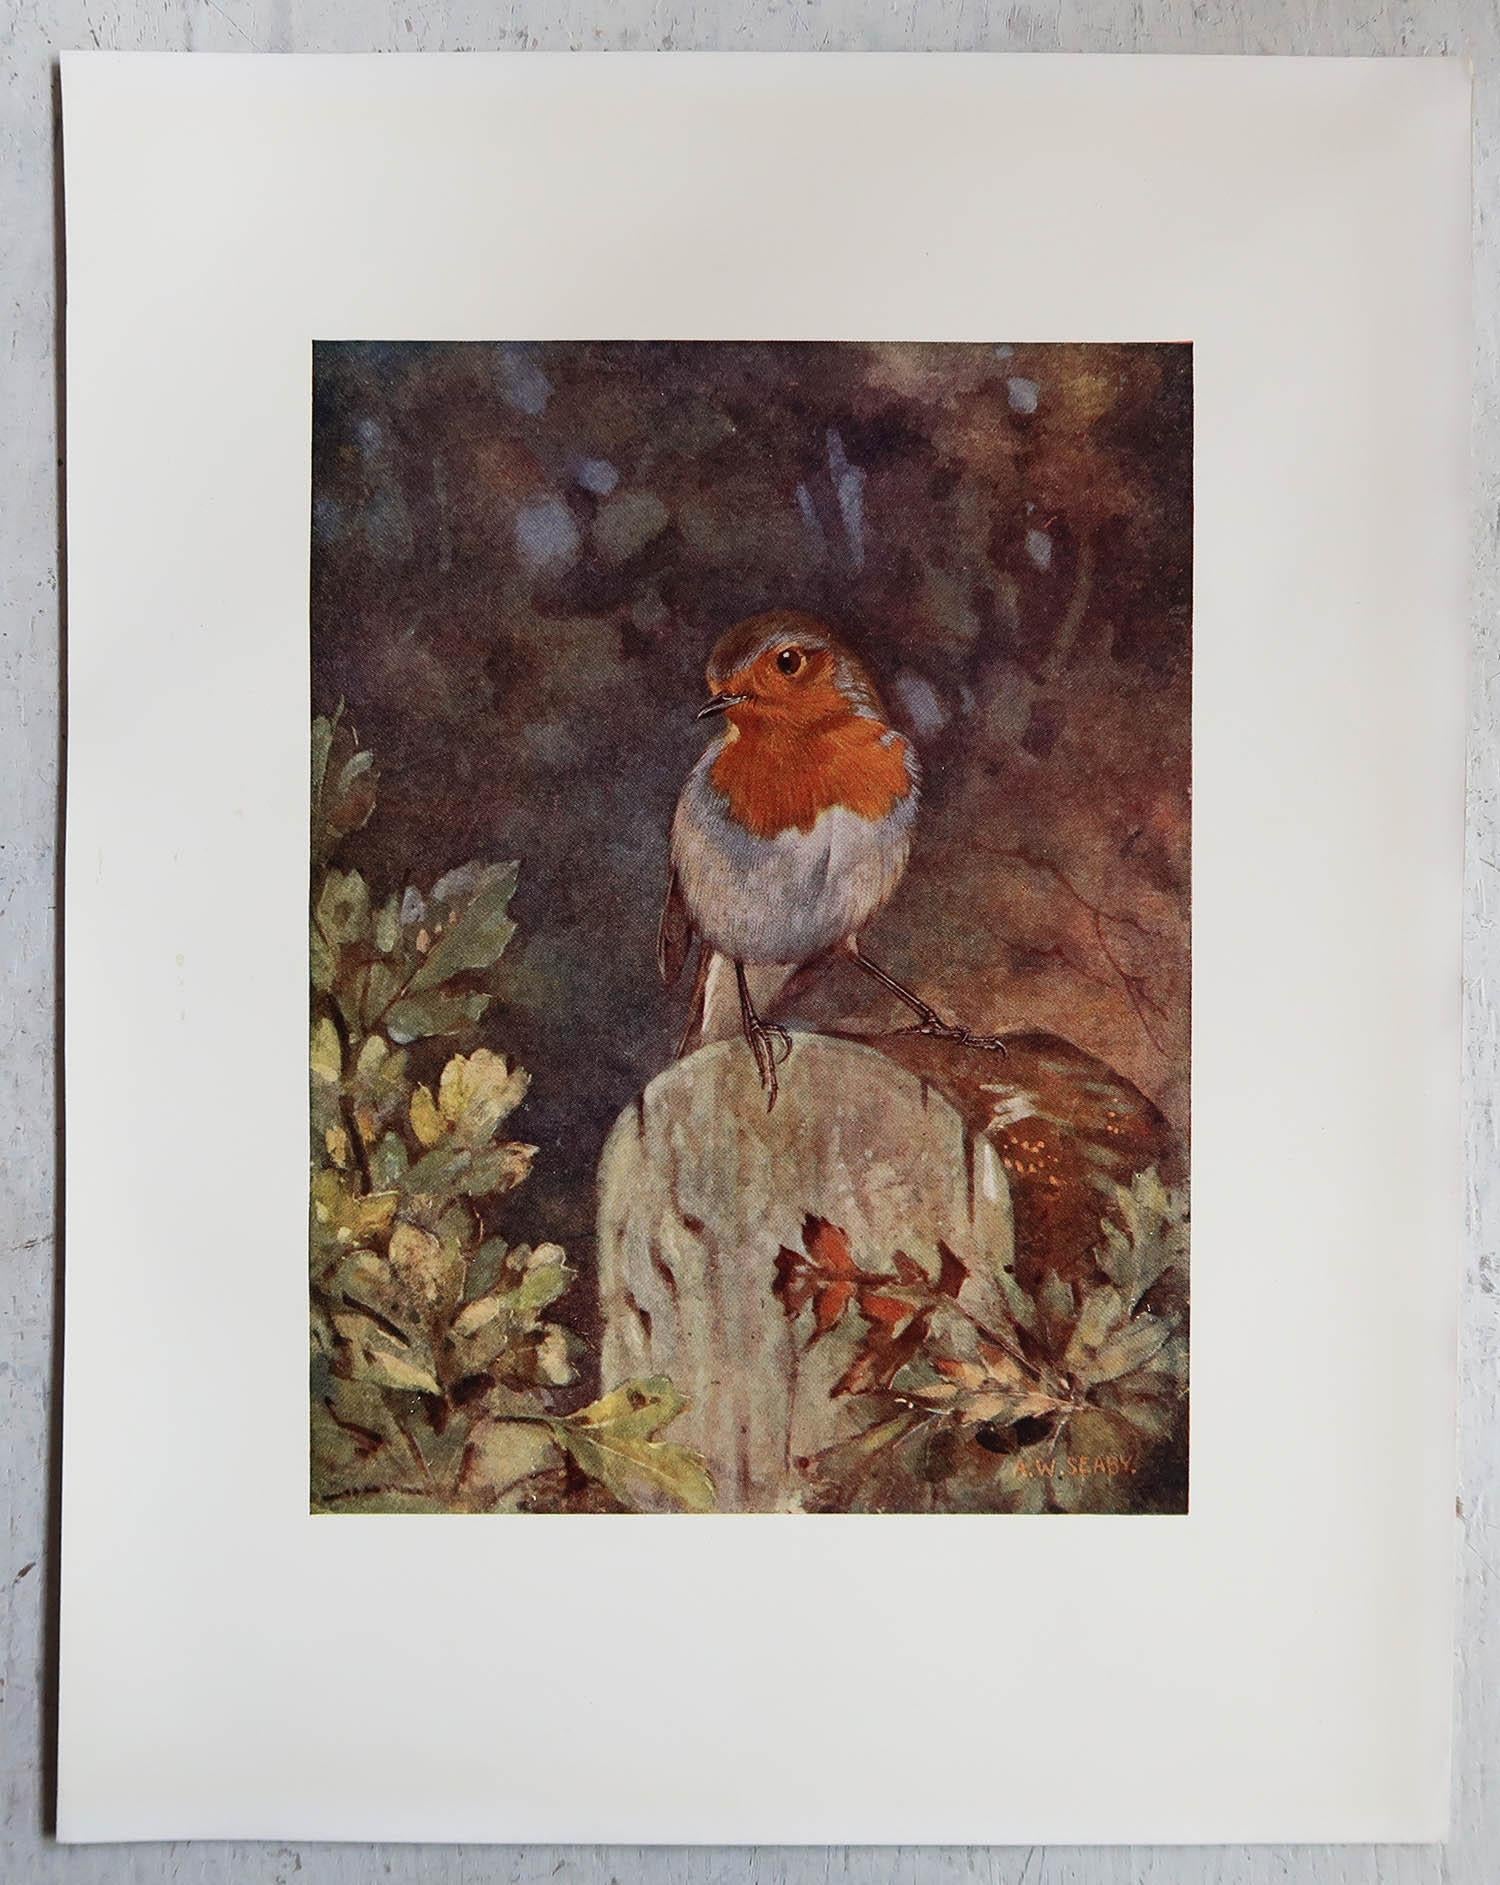 Edwardian Large Original Antique Print of a Robin After A.W Seaby, circa 1910